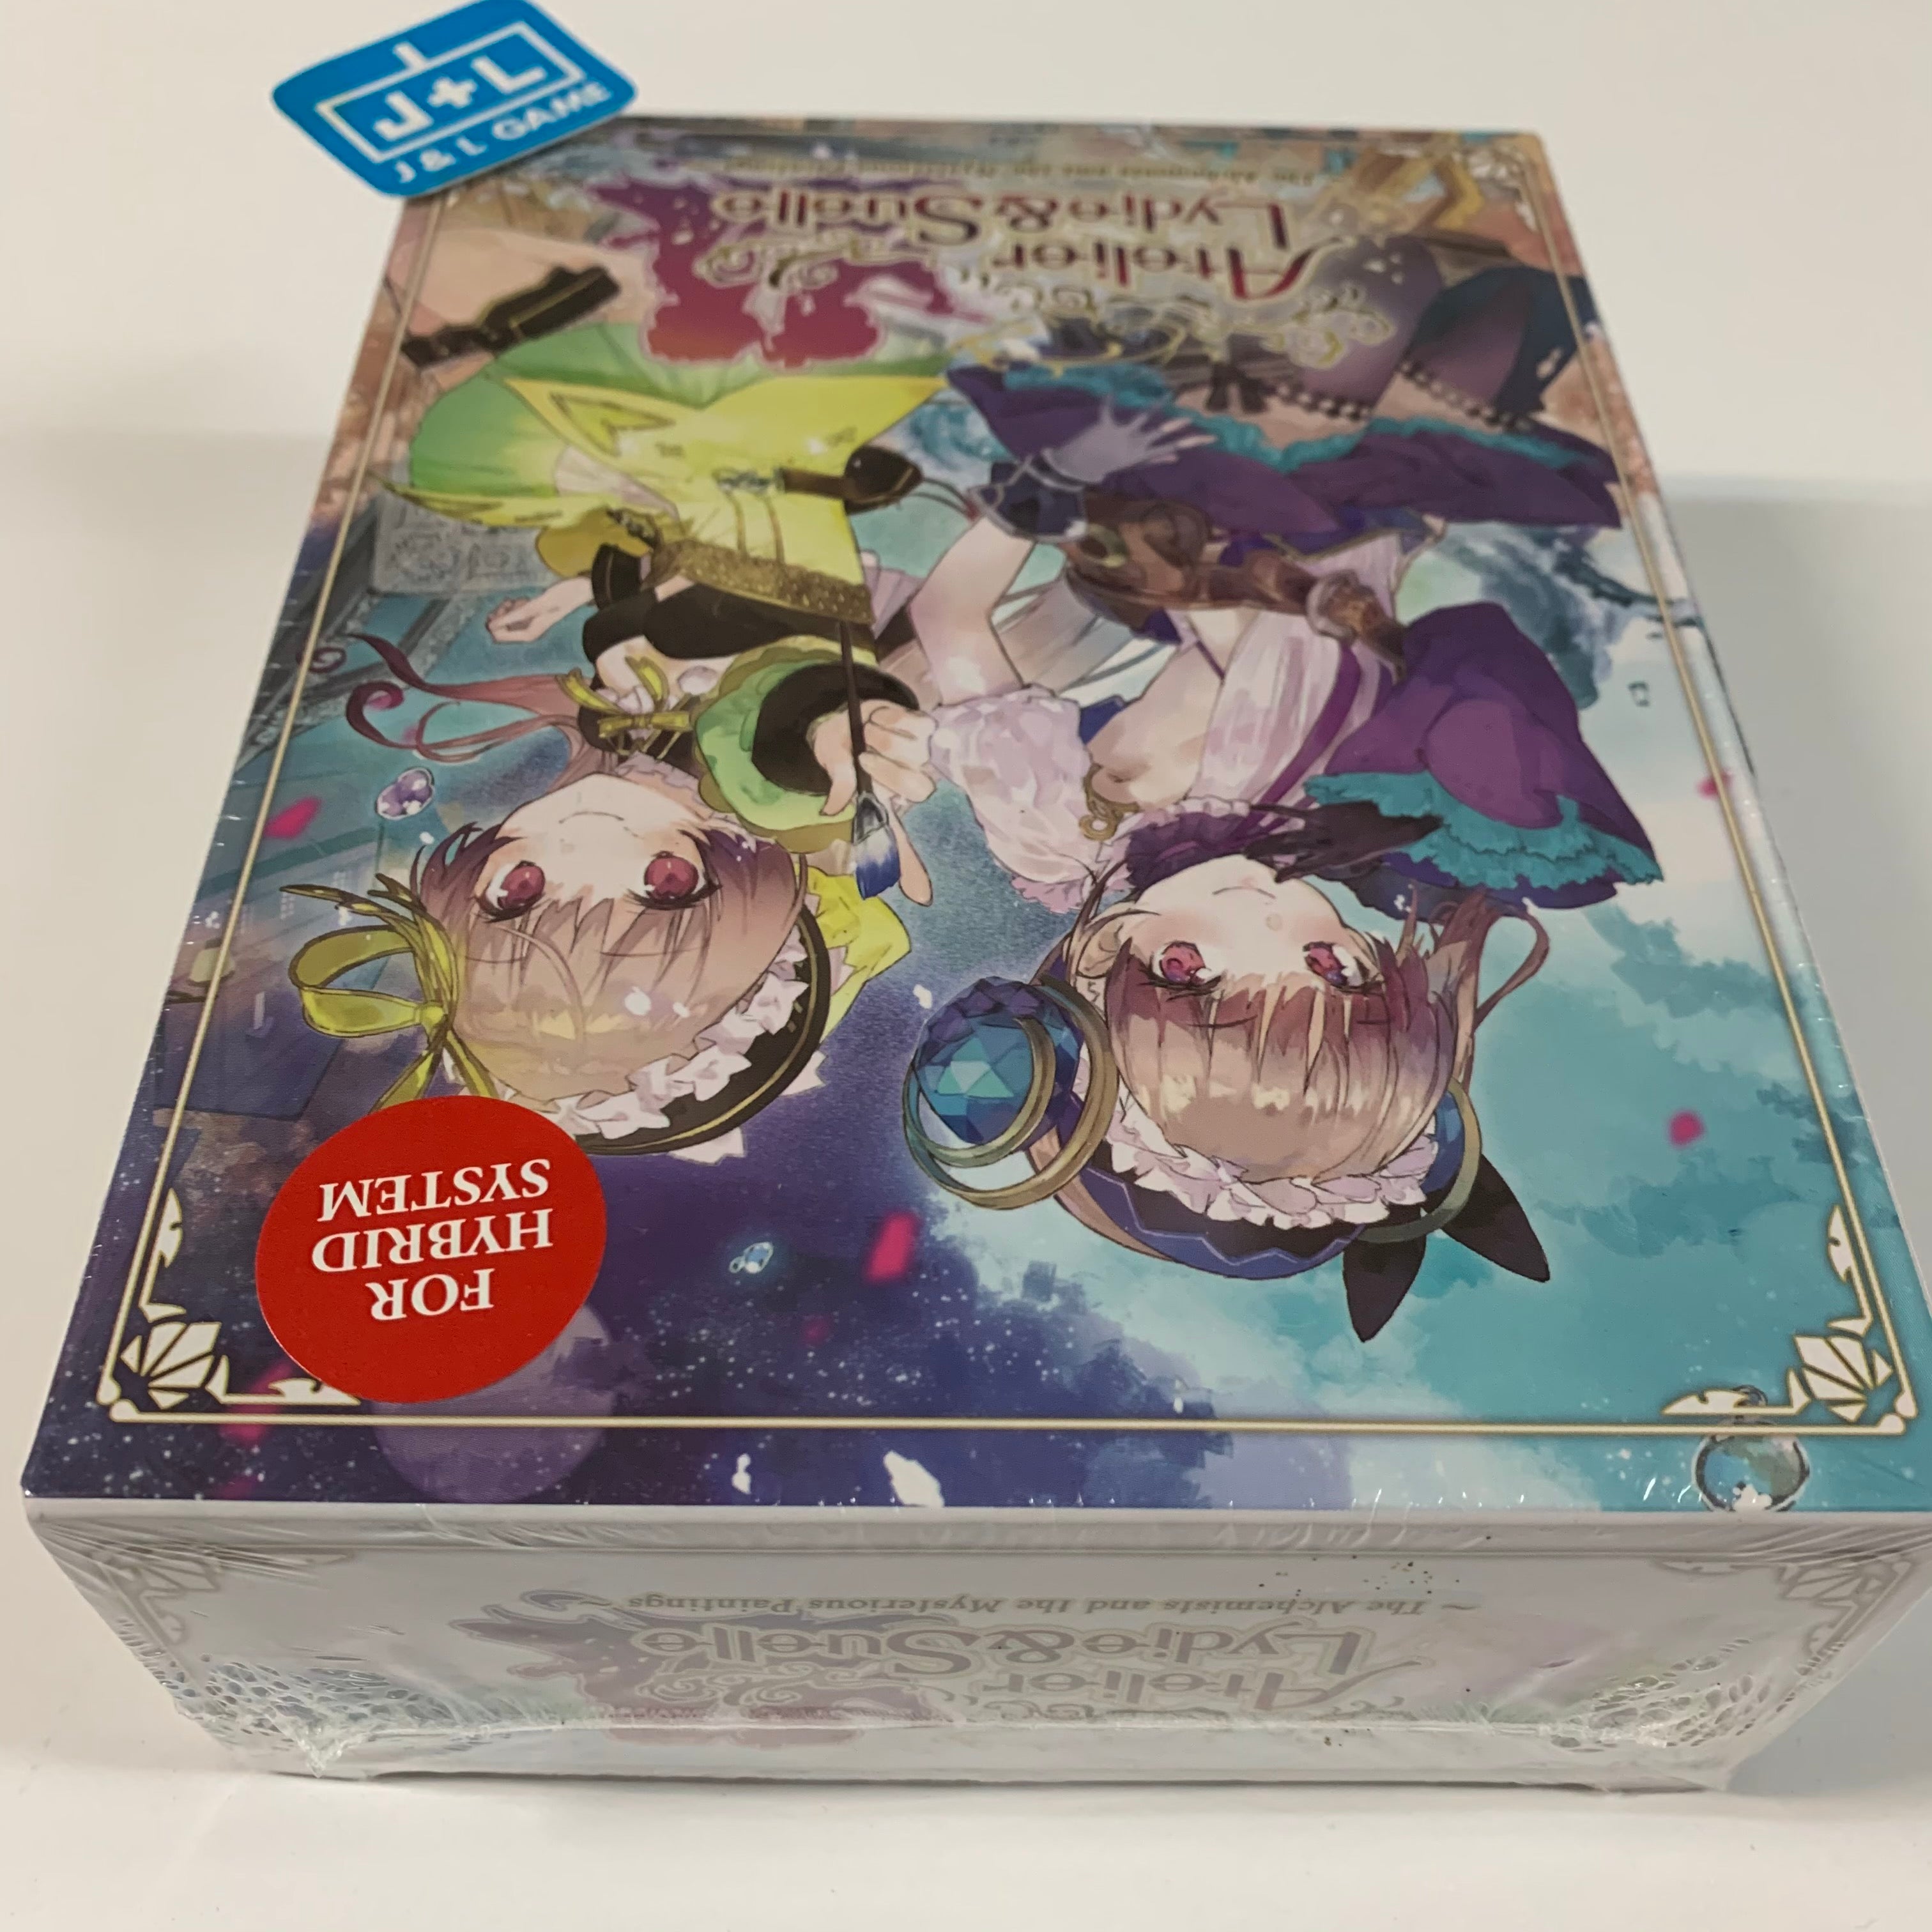 Atelier Lydie & Suelle: The Alchemists and the Mysterious Paintings Limited Edition - (NSW) Nintendo Switch Video Games Koei Tecmo Games   